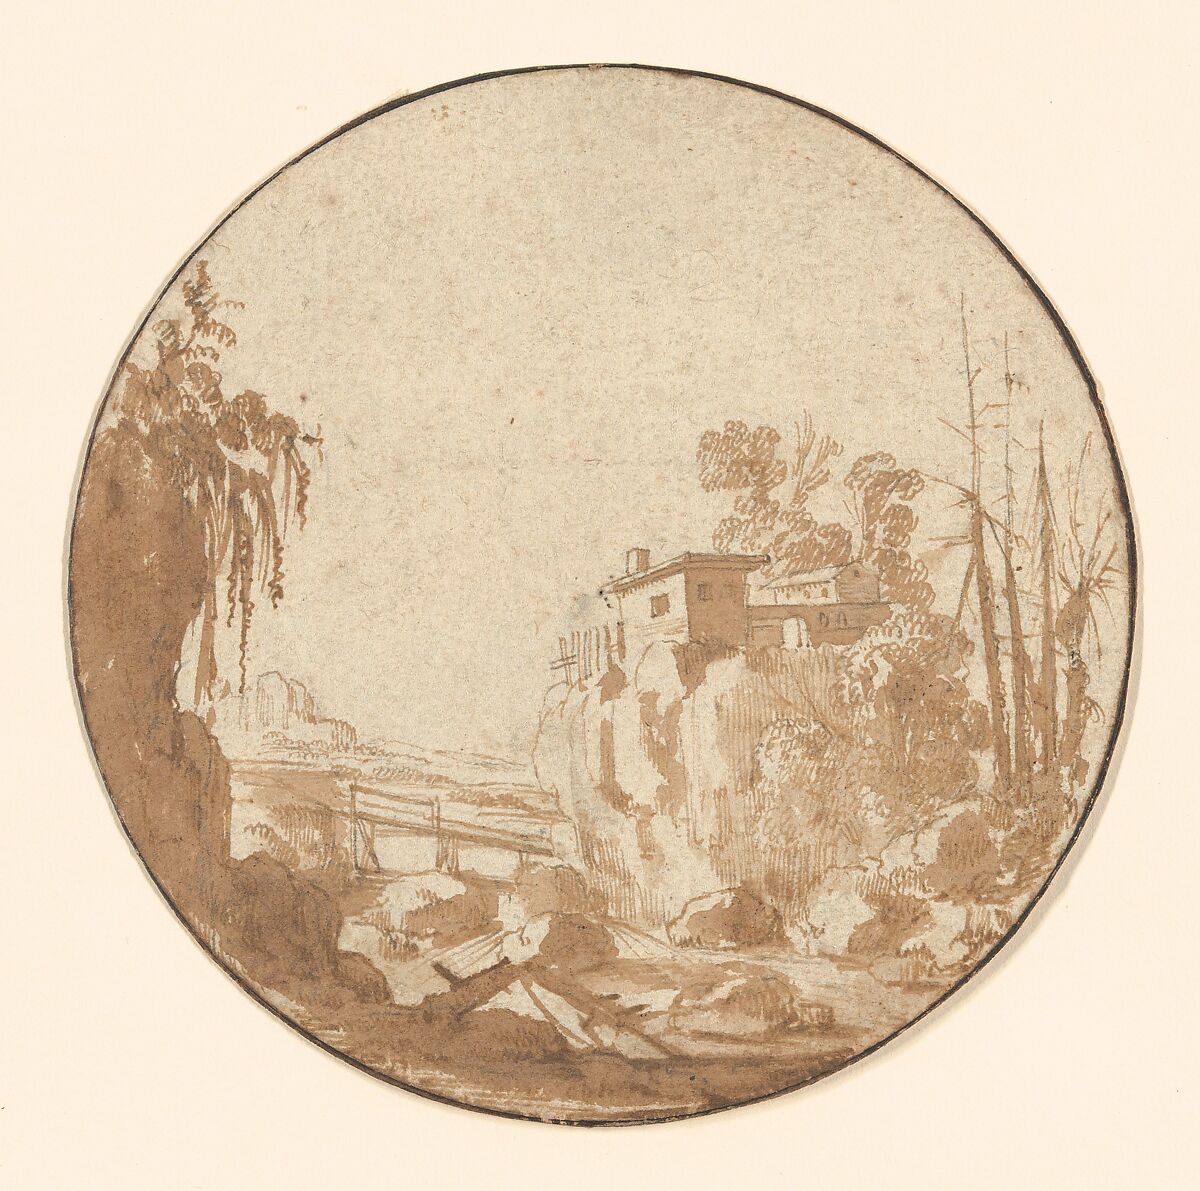 Rocky Landscape With a Bridge and a House, Charles Cornelisz. de Hooch (Dutch, The Hague? ca. 1600/06?–1638 Utrecht), Pen and brown ink, brown wash, incised for transfer; framing line in pen and black ink, probably by a later hand 